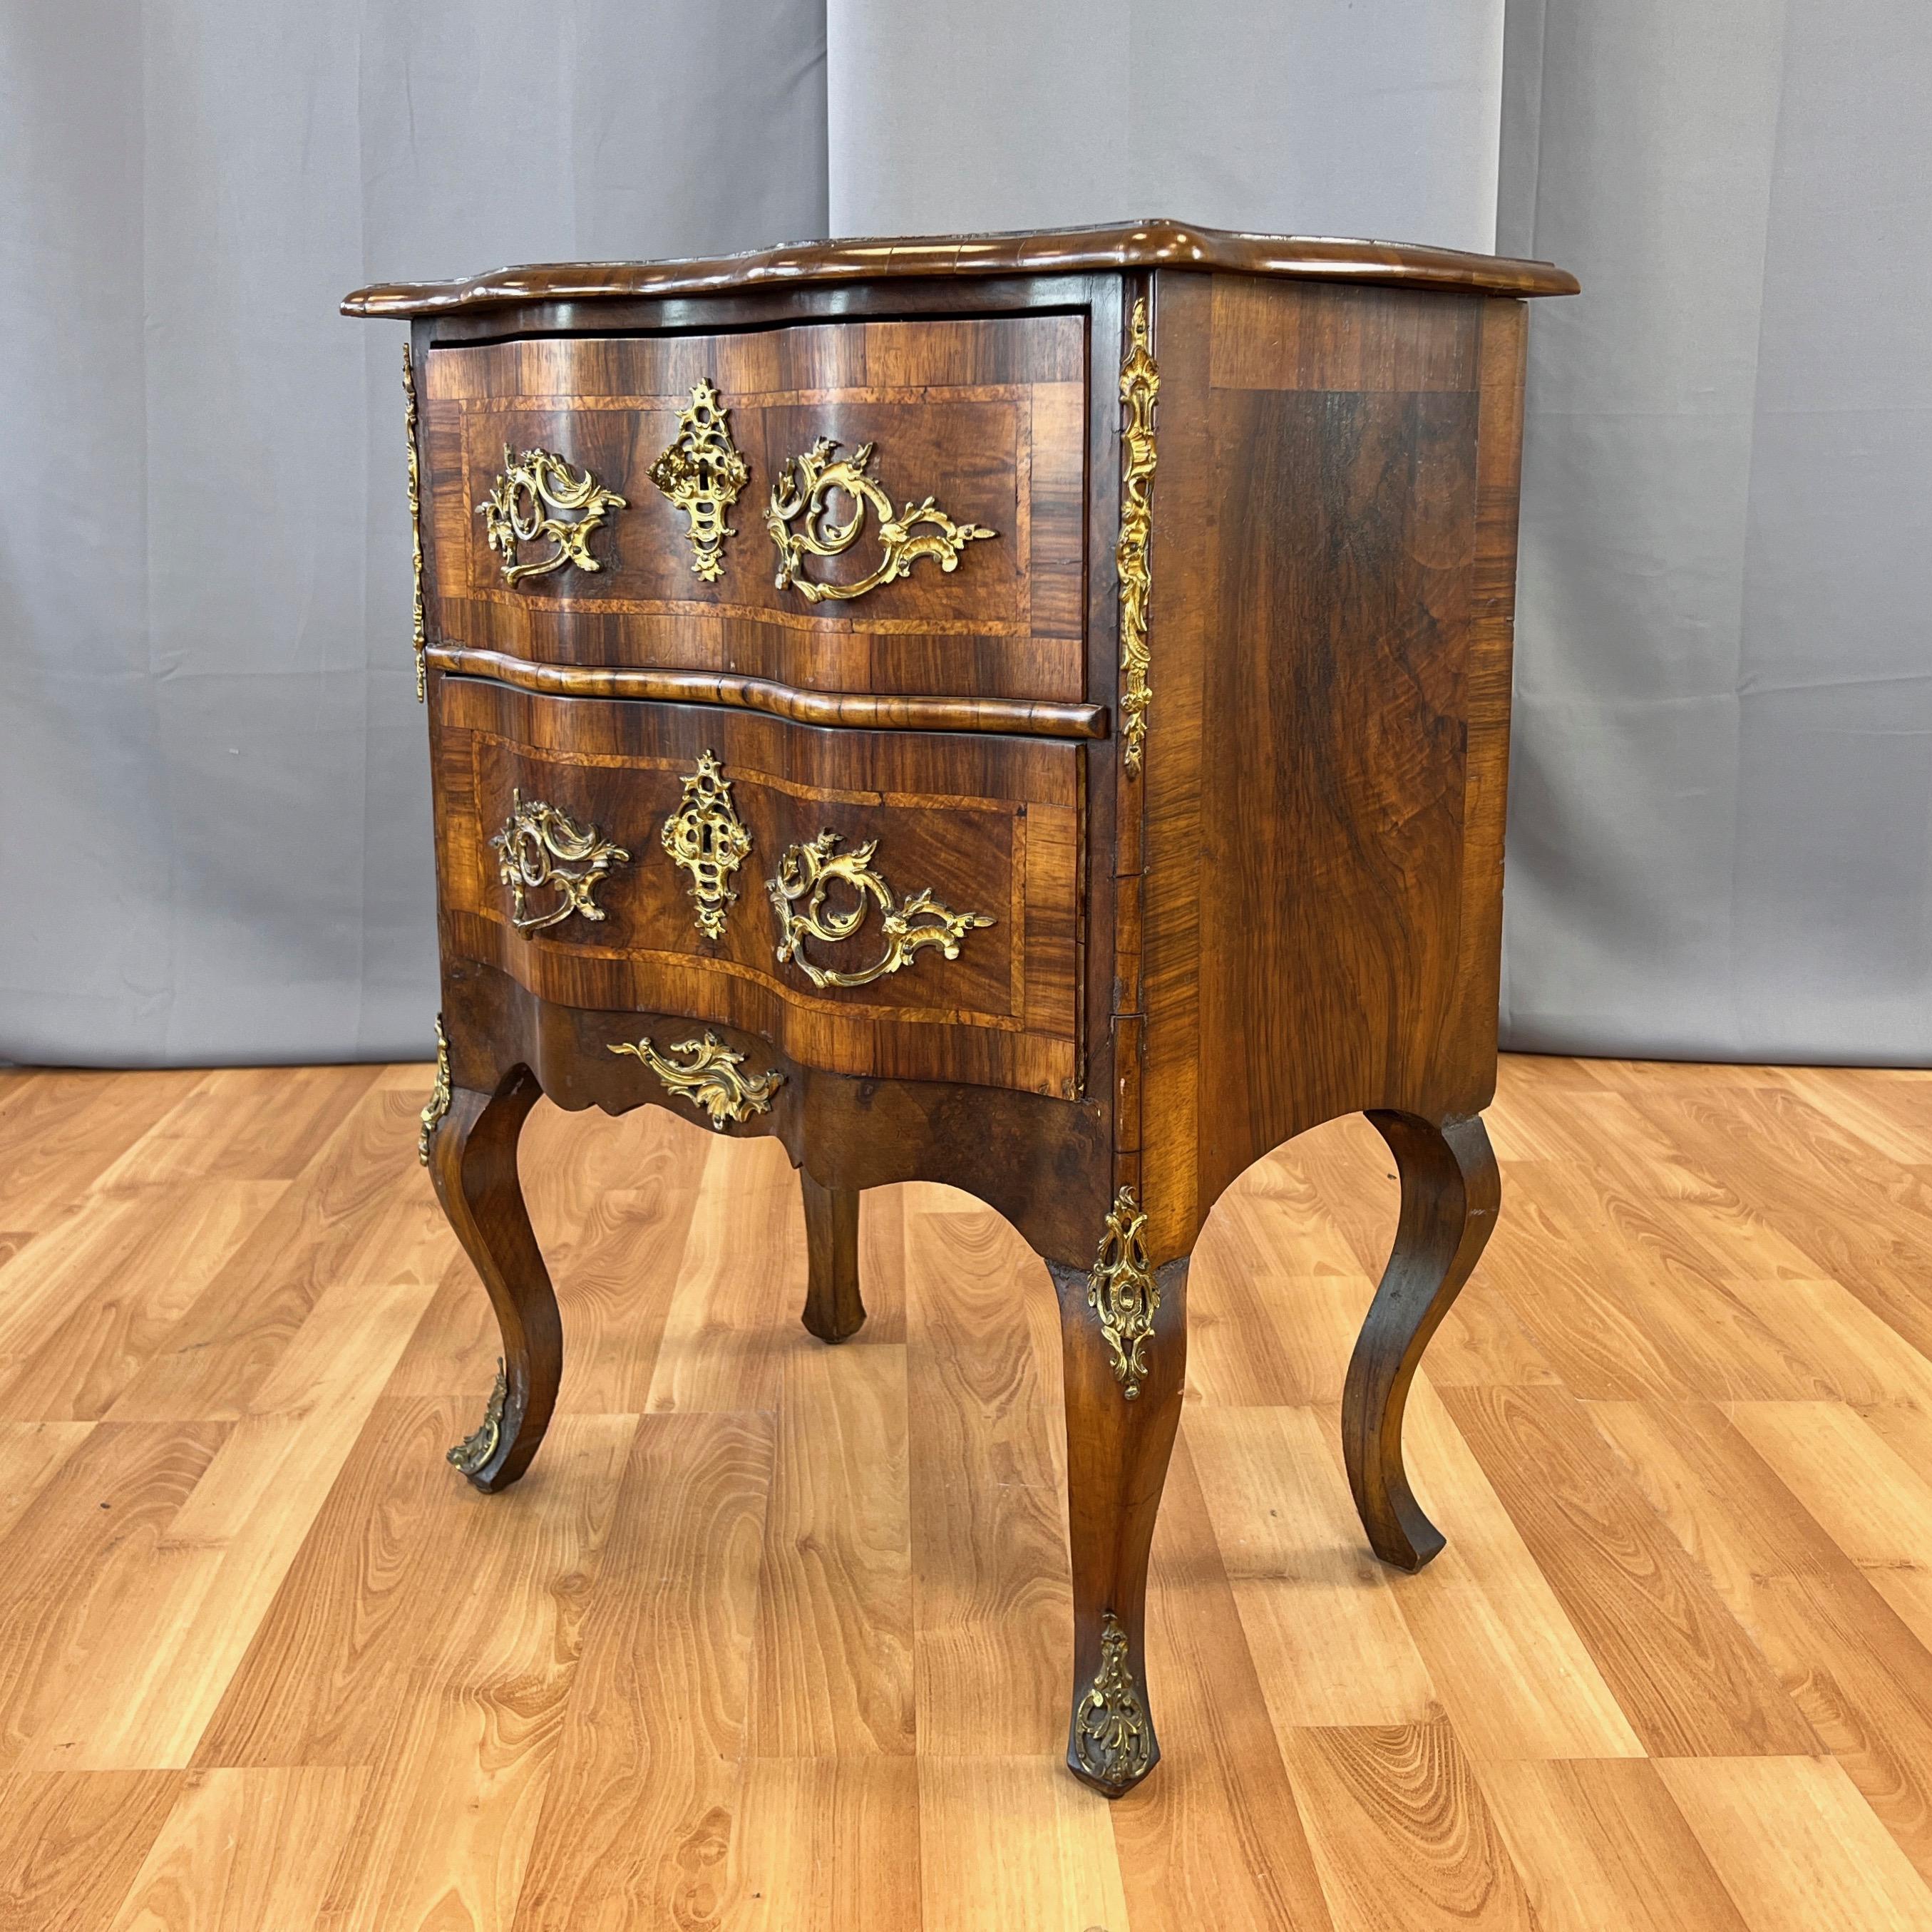 An exceptionally handsome early 19th century French Louis XV walnut, burlwood, satinwood, and fruitwood marquetry lockable two-drawer commode or petite chest with ormolu mounts and embellishments.

Dynamically figured and beautifully contrasting